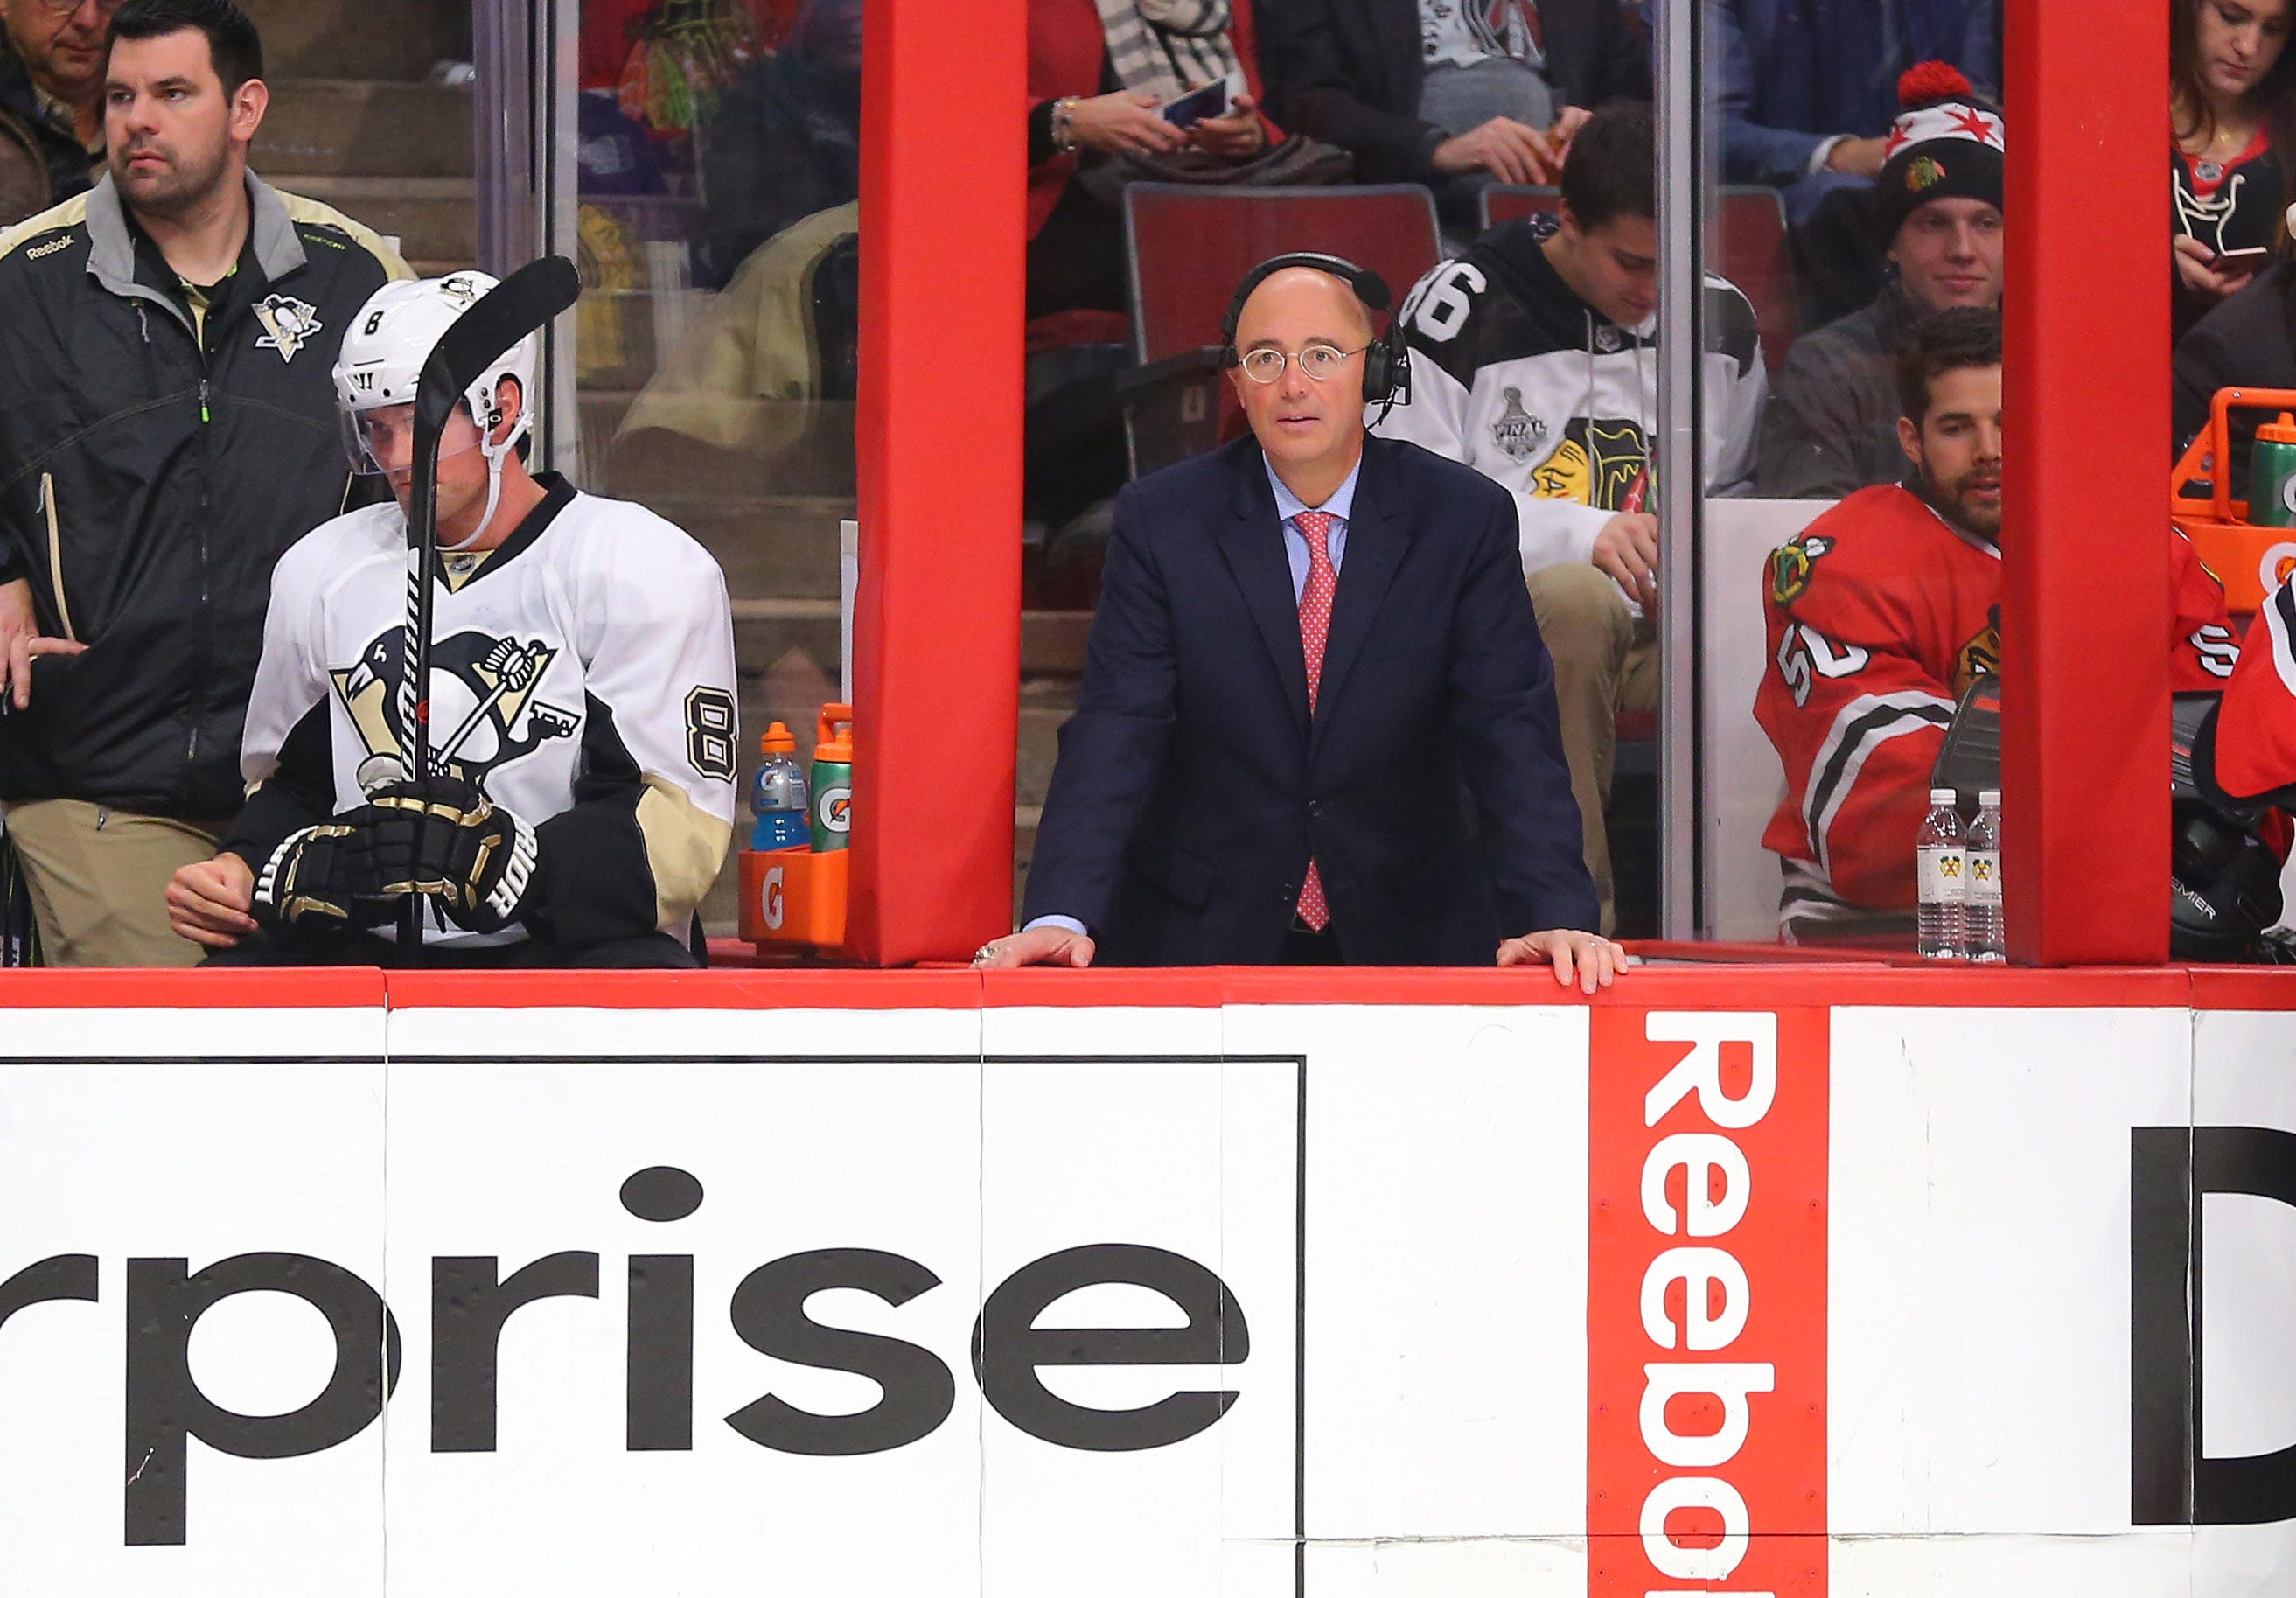 NBC hockey analyst Pierre McGuire diagnosed with prostate cancer